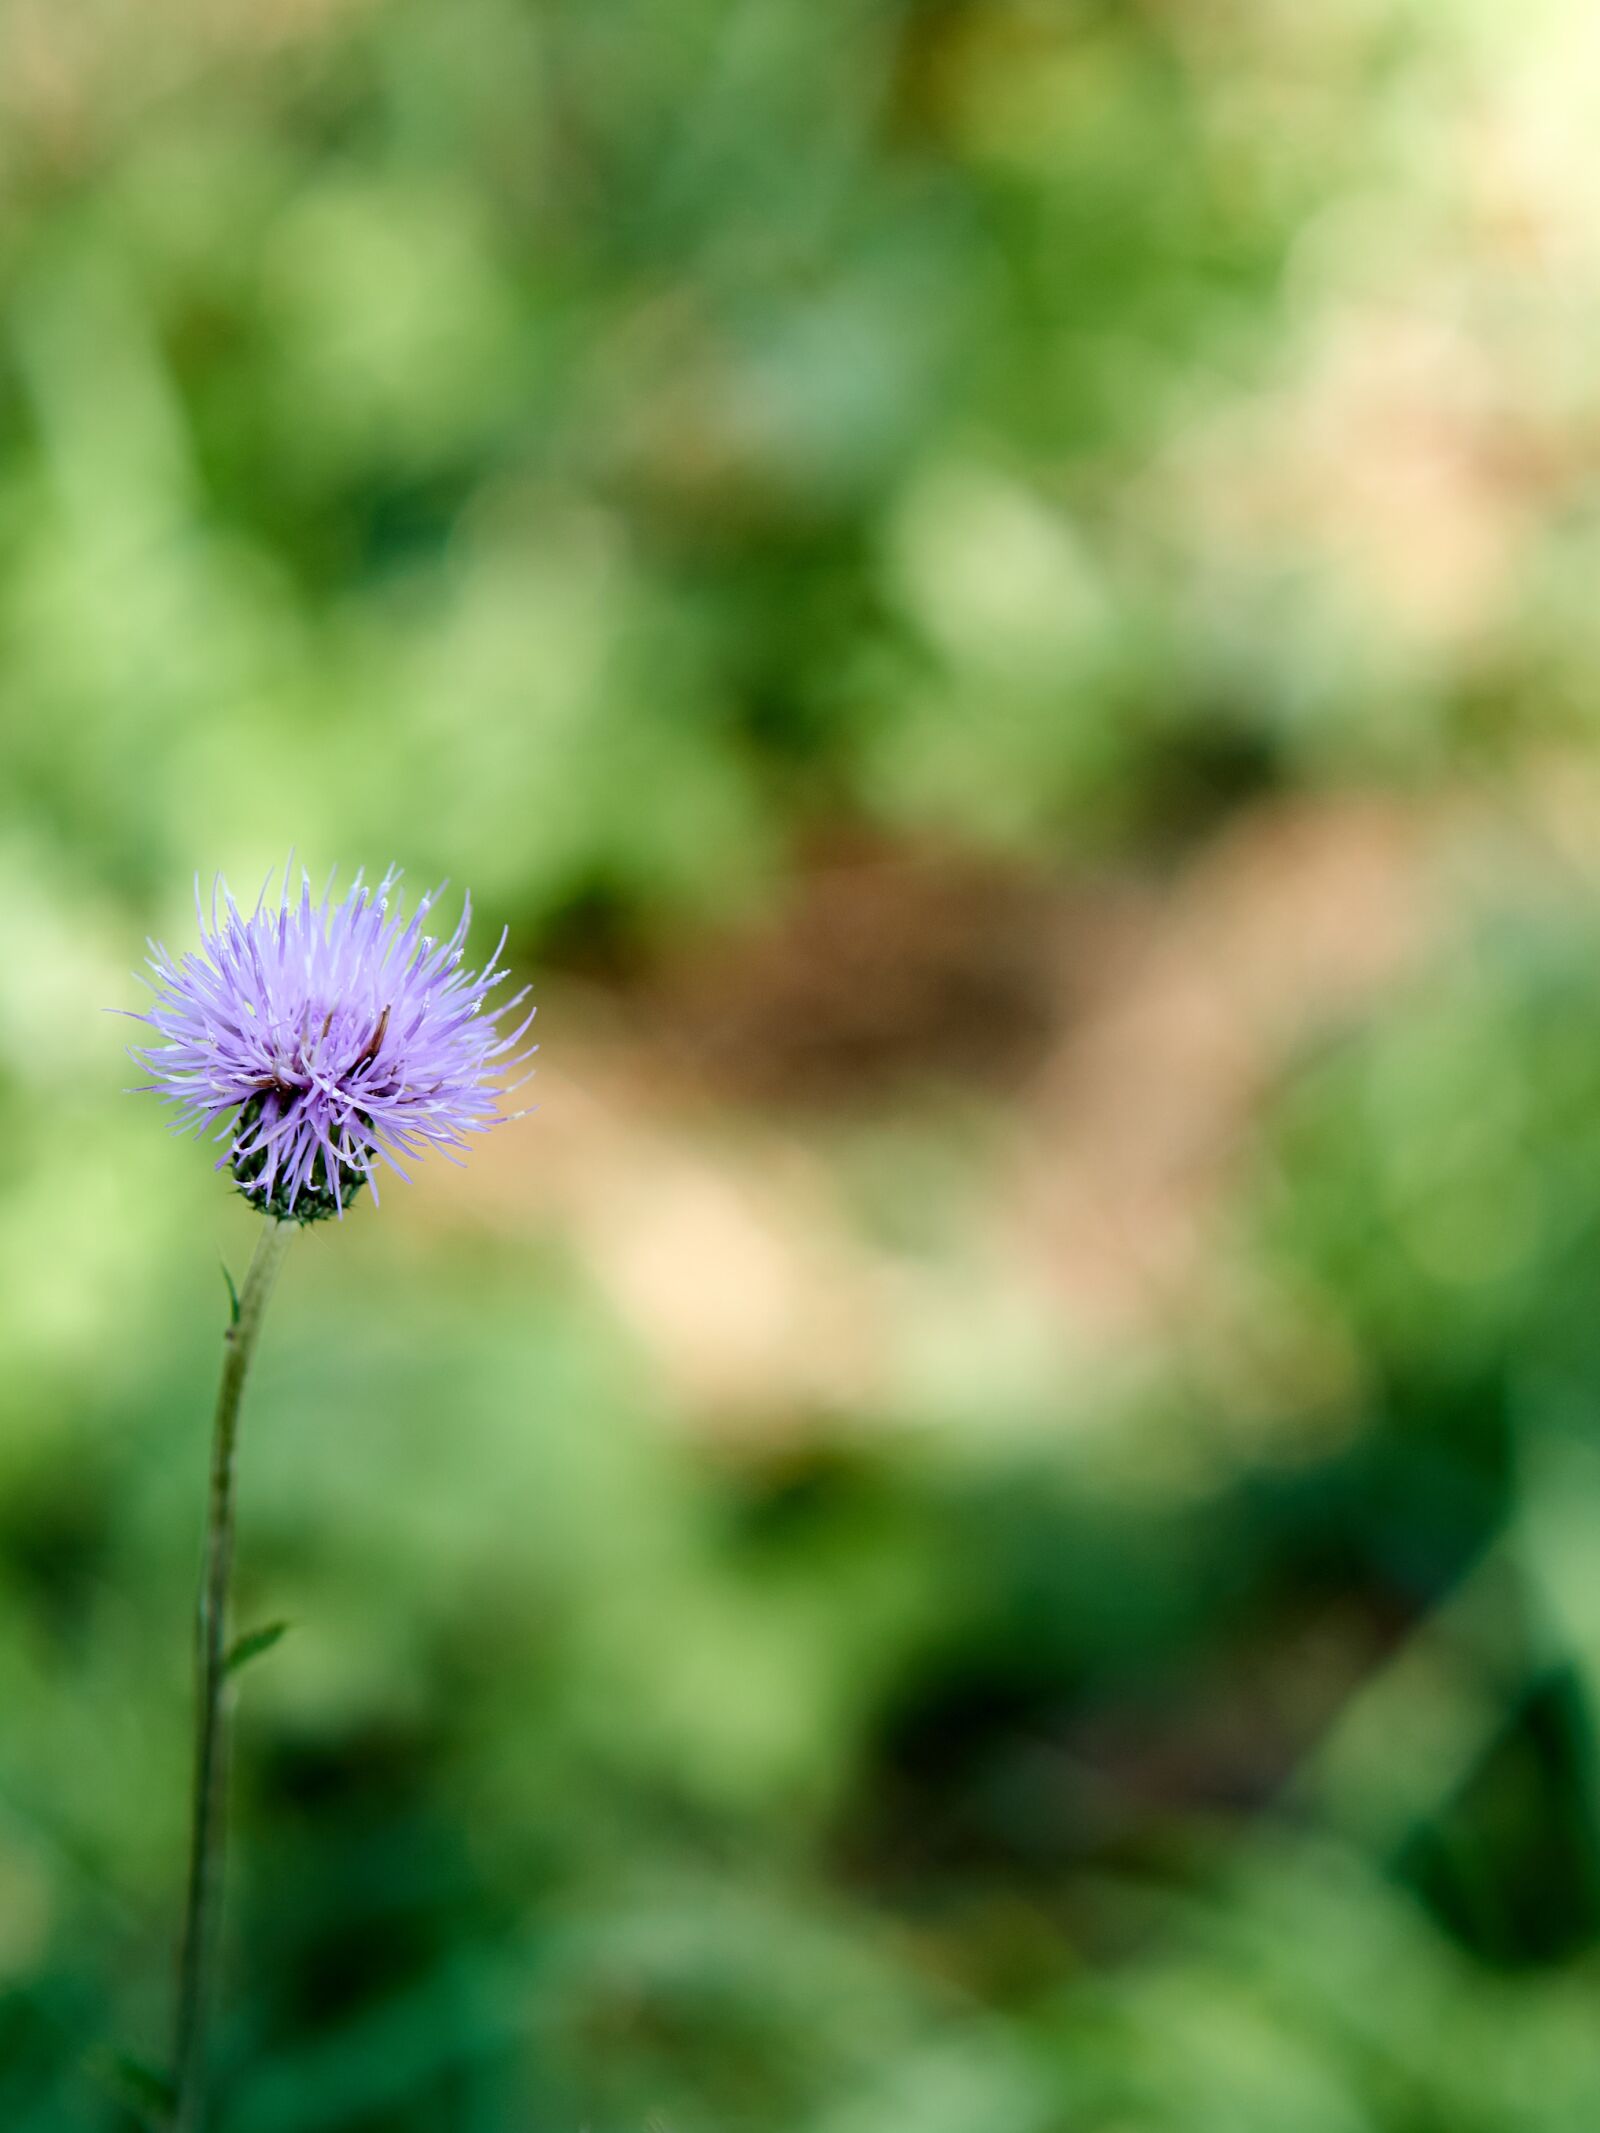 Sony a6000 sample photo. Flower, green, nature photography